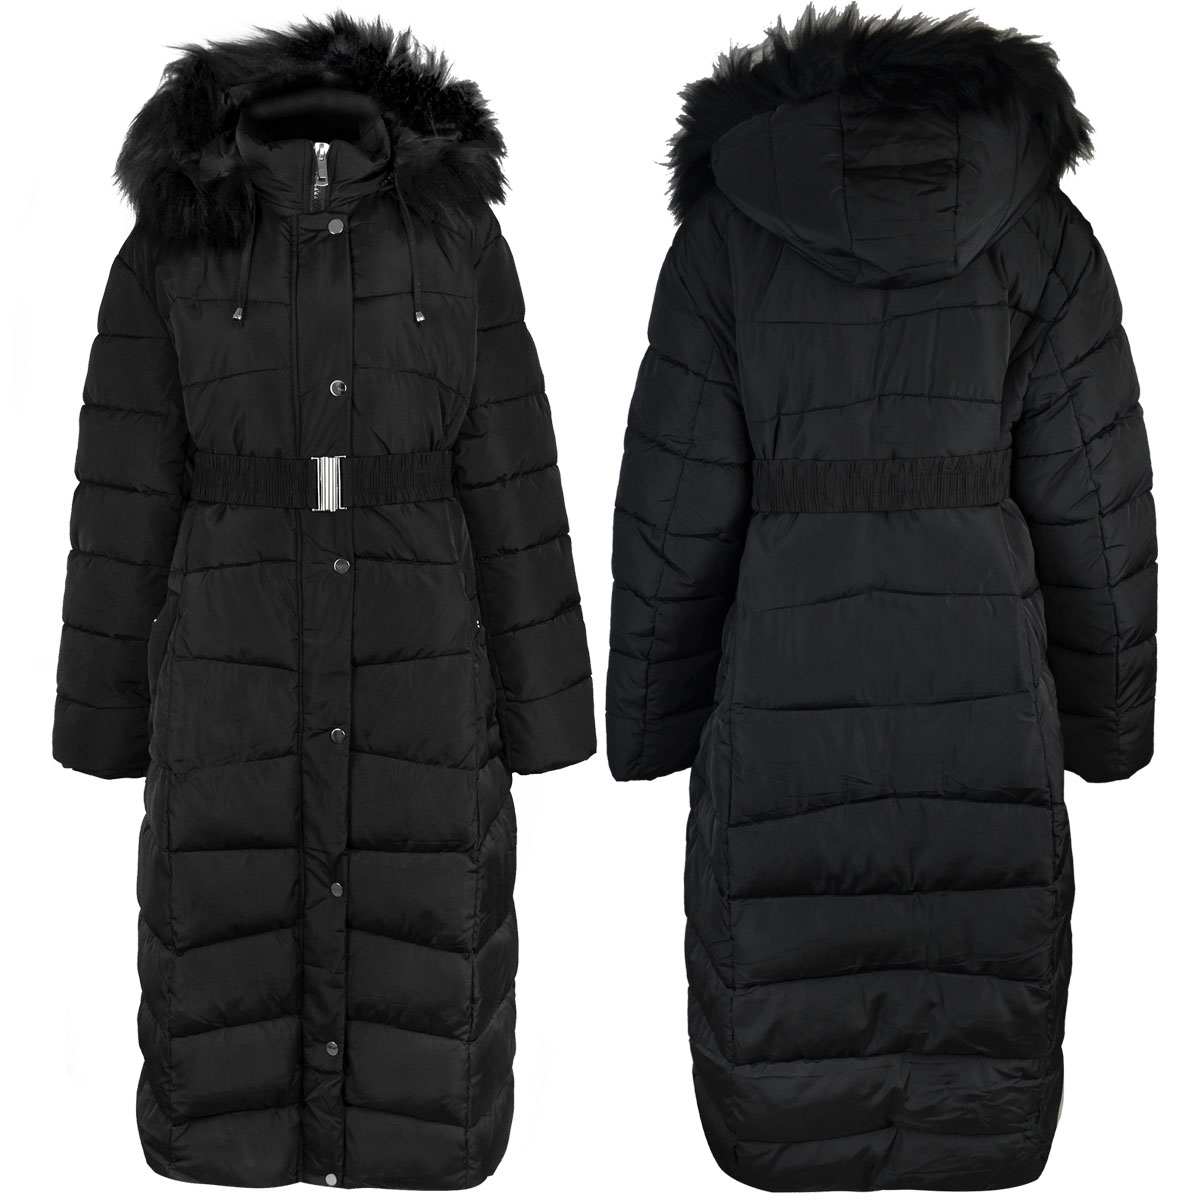 New Womens Ladies Plus Size Long Quilted Padded Winter Jacket Coat Fur ...